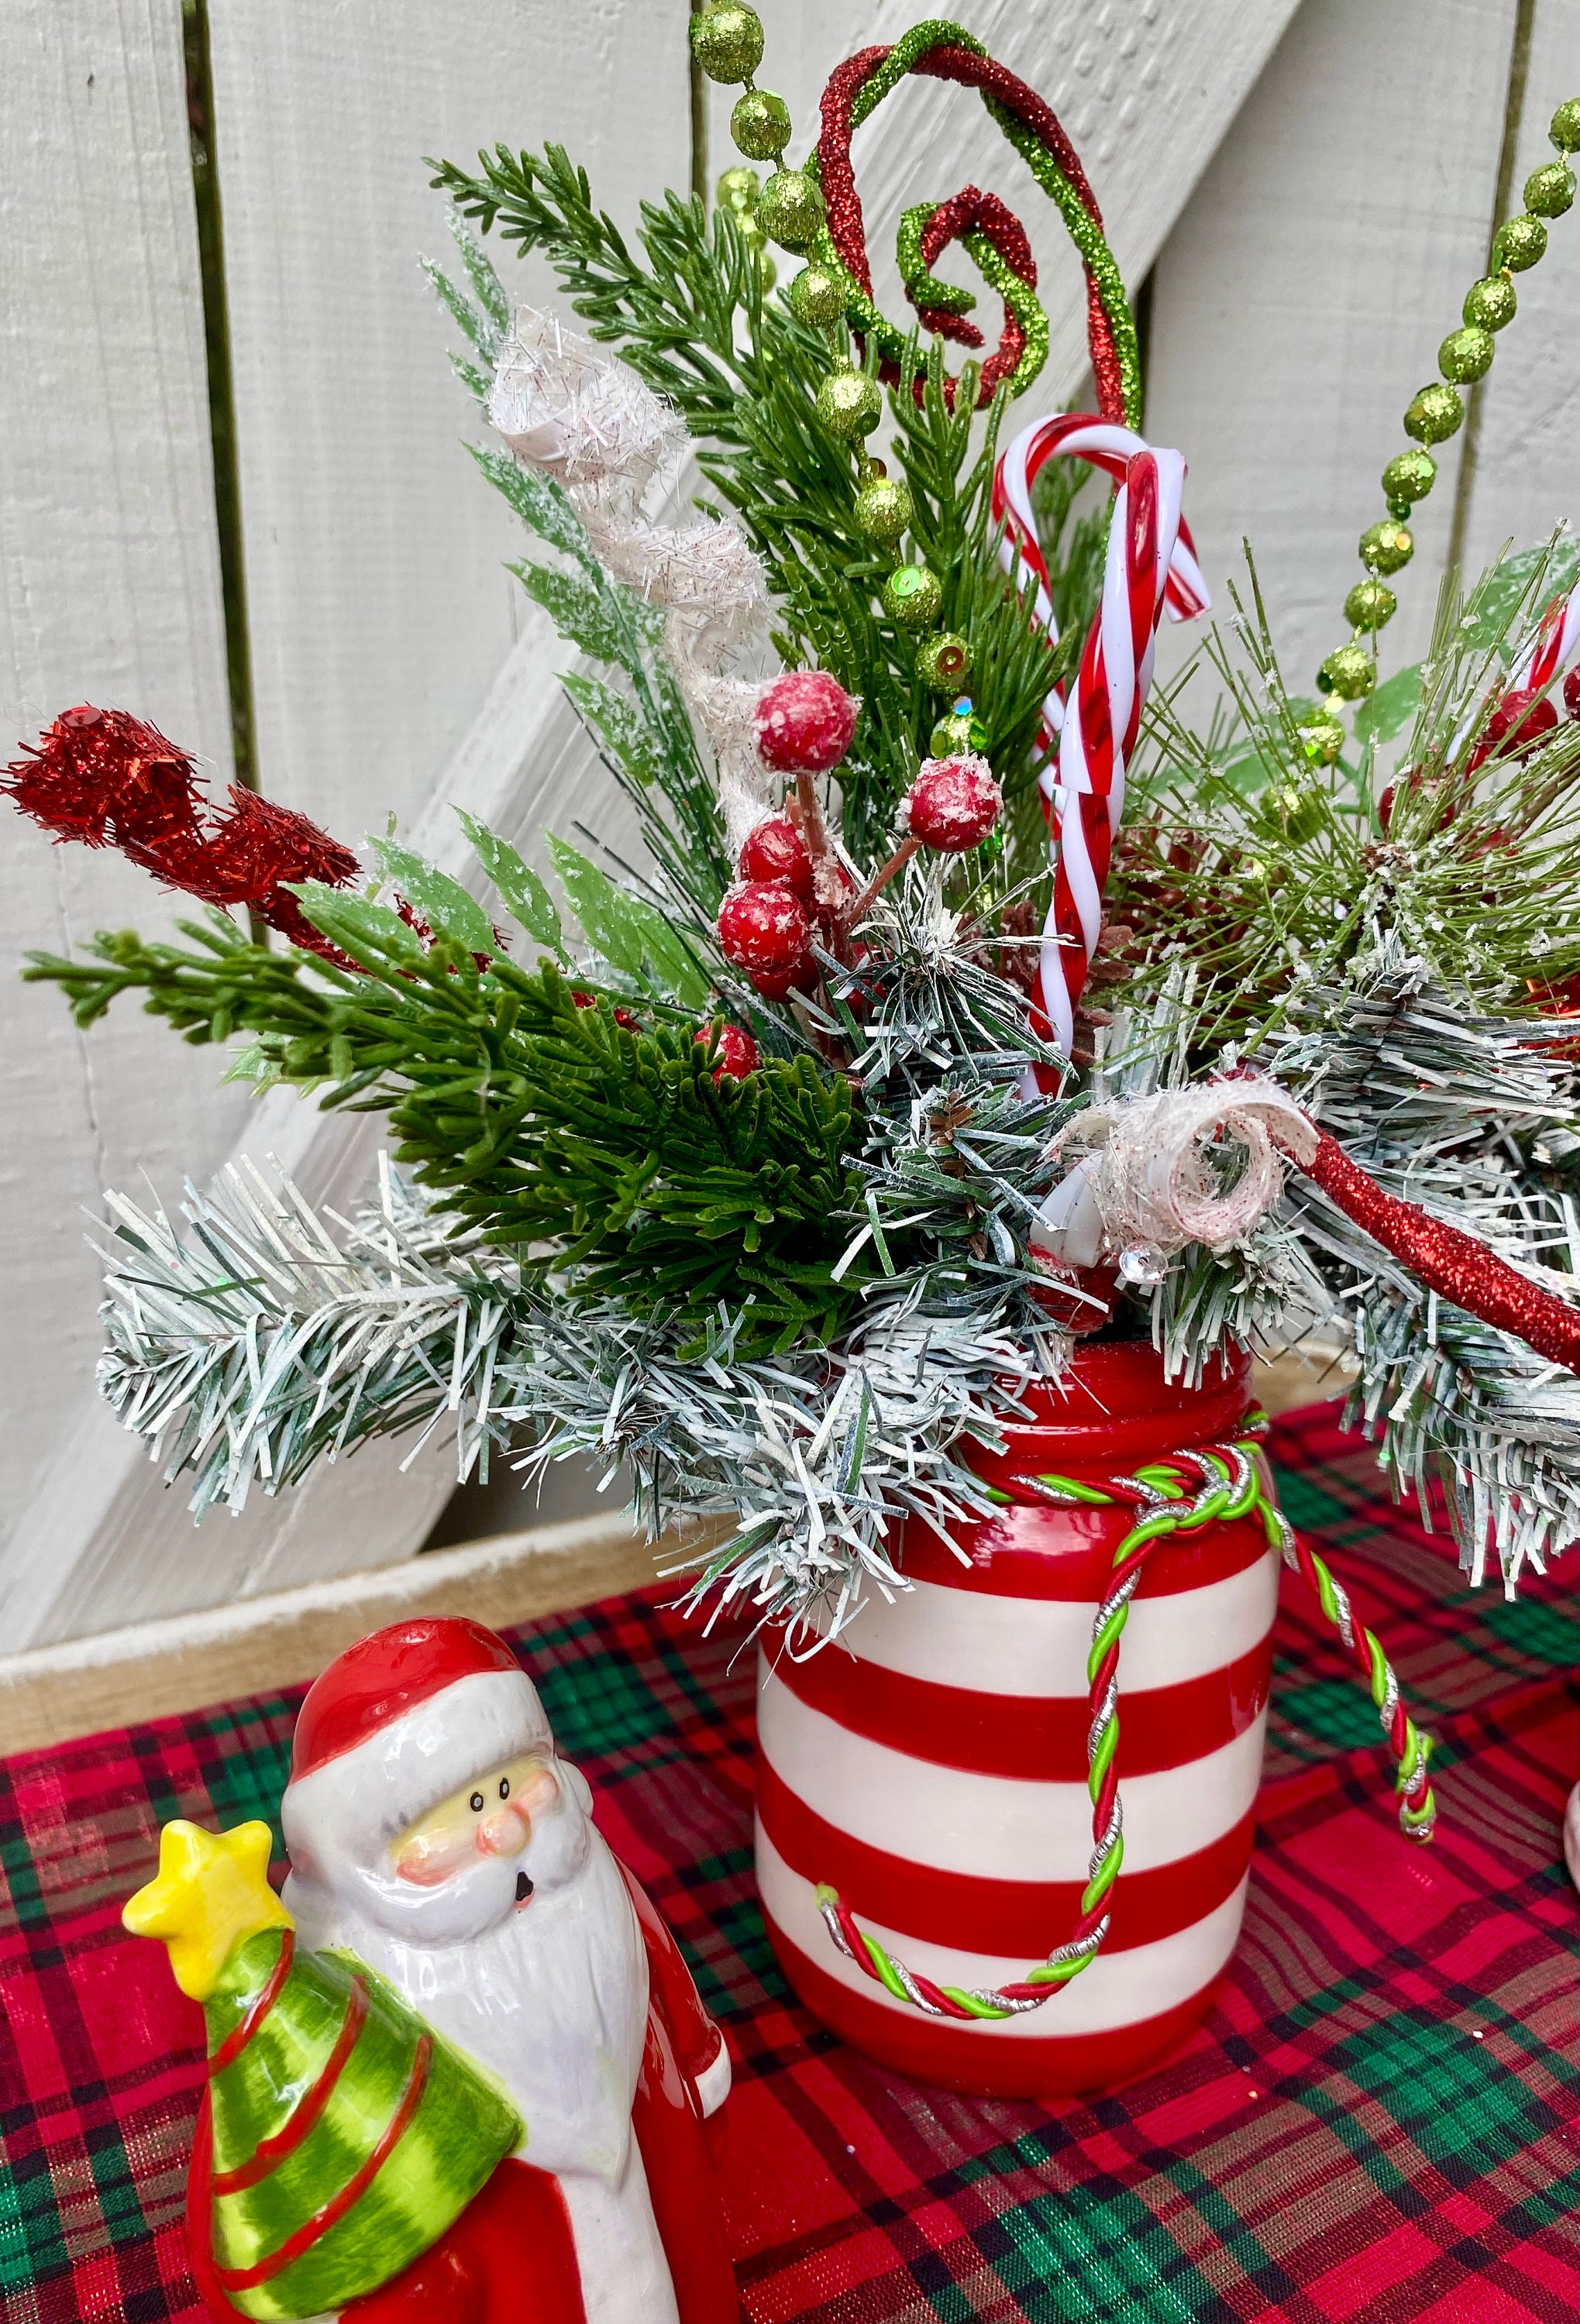 17 Illuminated Candy Cane Arrangement in Santa Boot by Valerie